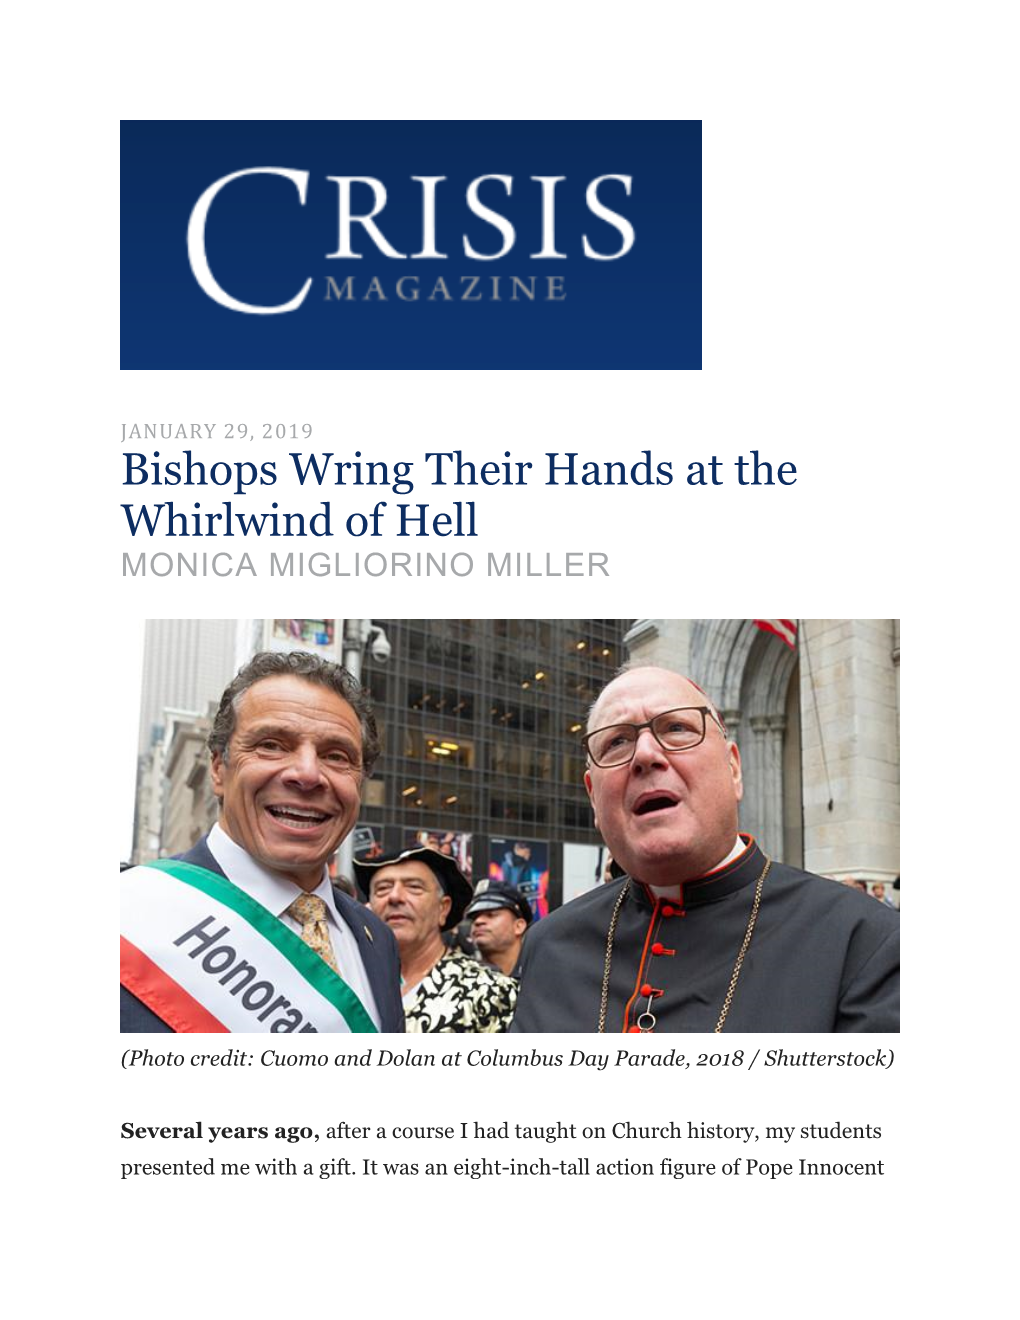 Bishops Wring Their Hands at the Whirlwind of Hell MONICA MIGLIORINO MILLER